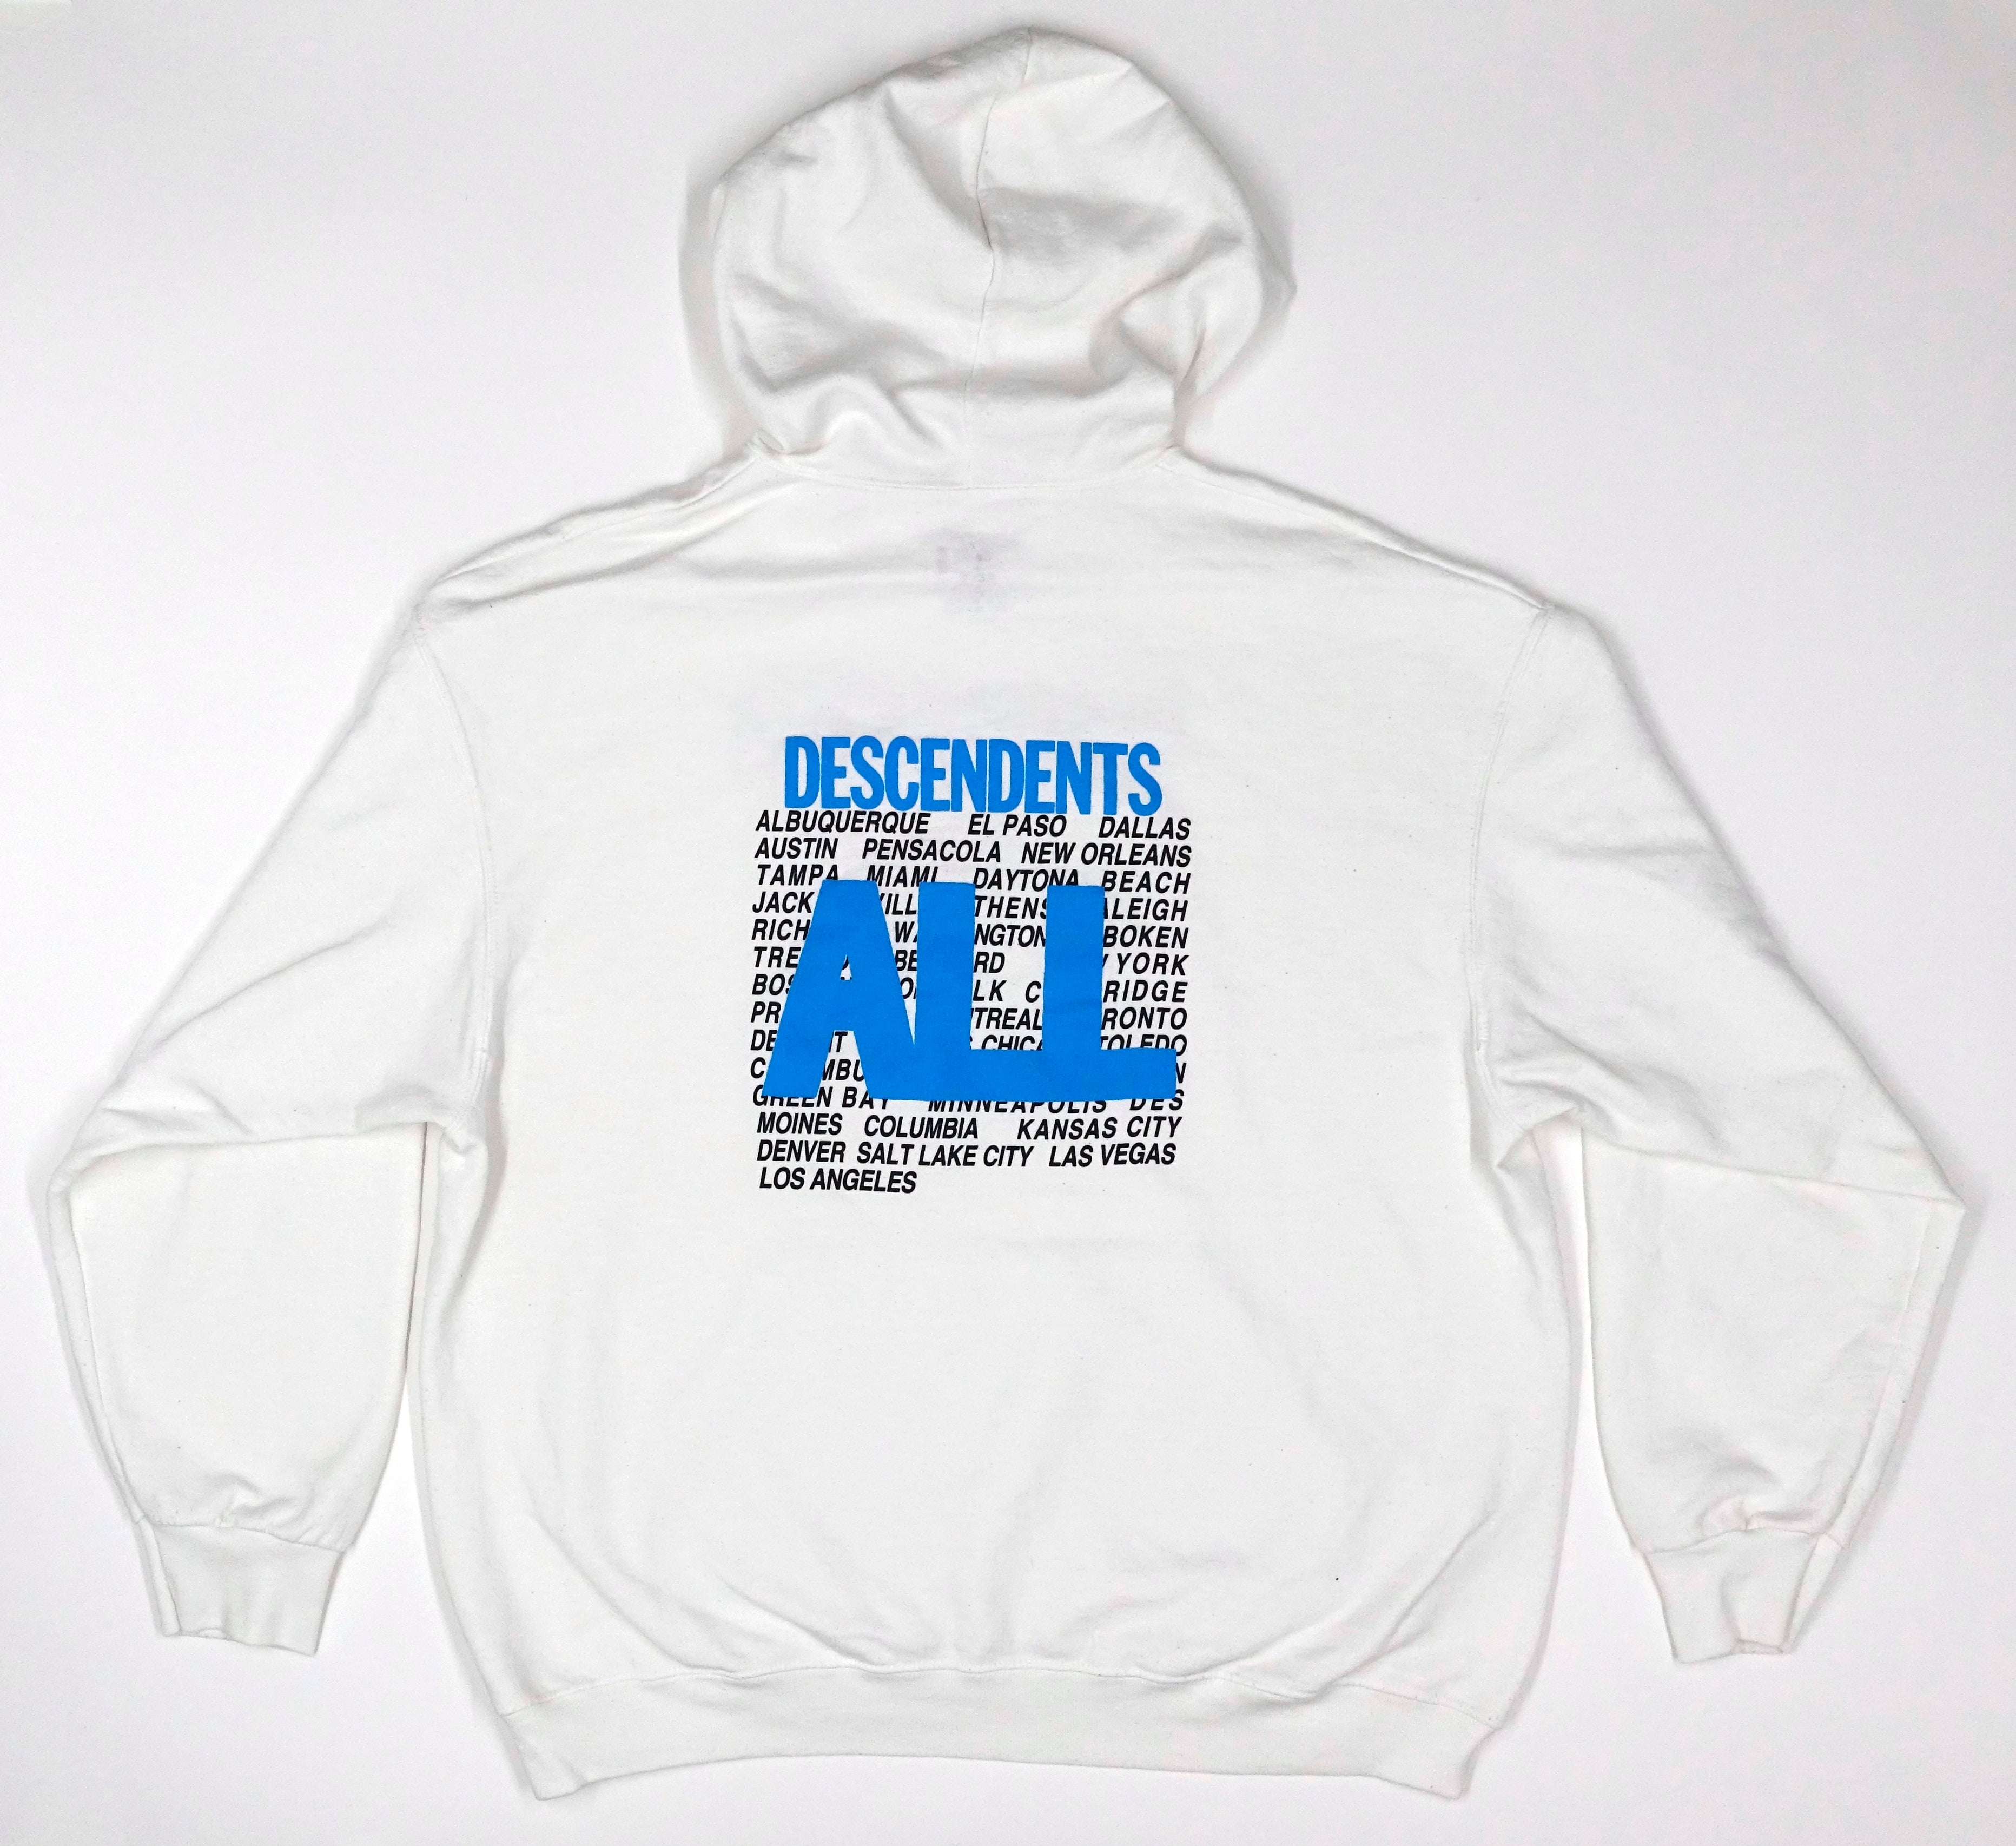 Descendents - ALL 1987 FinALL Tour (Bootleg By Me) Hooded Sweat Shirt Size XL